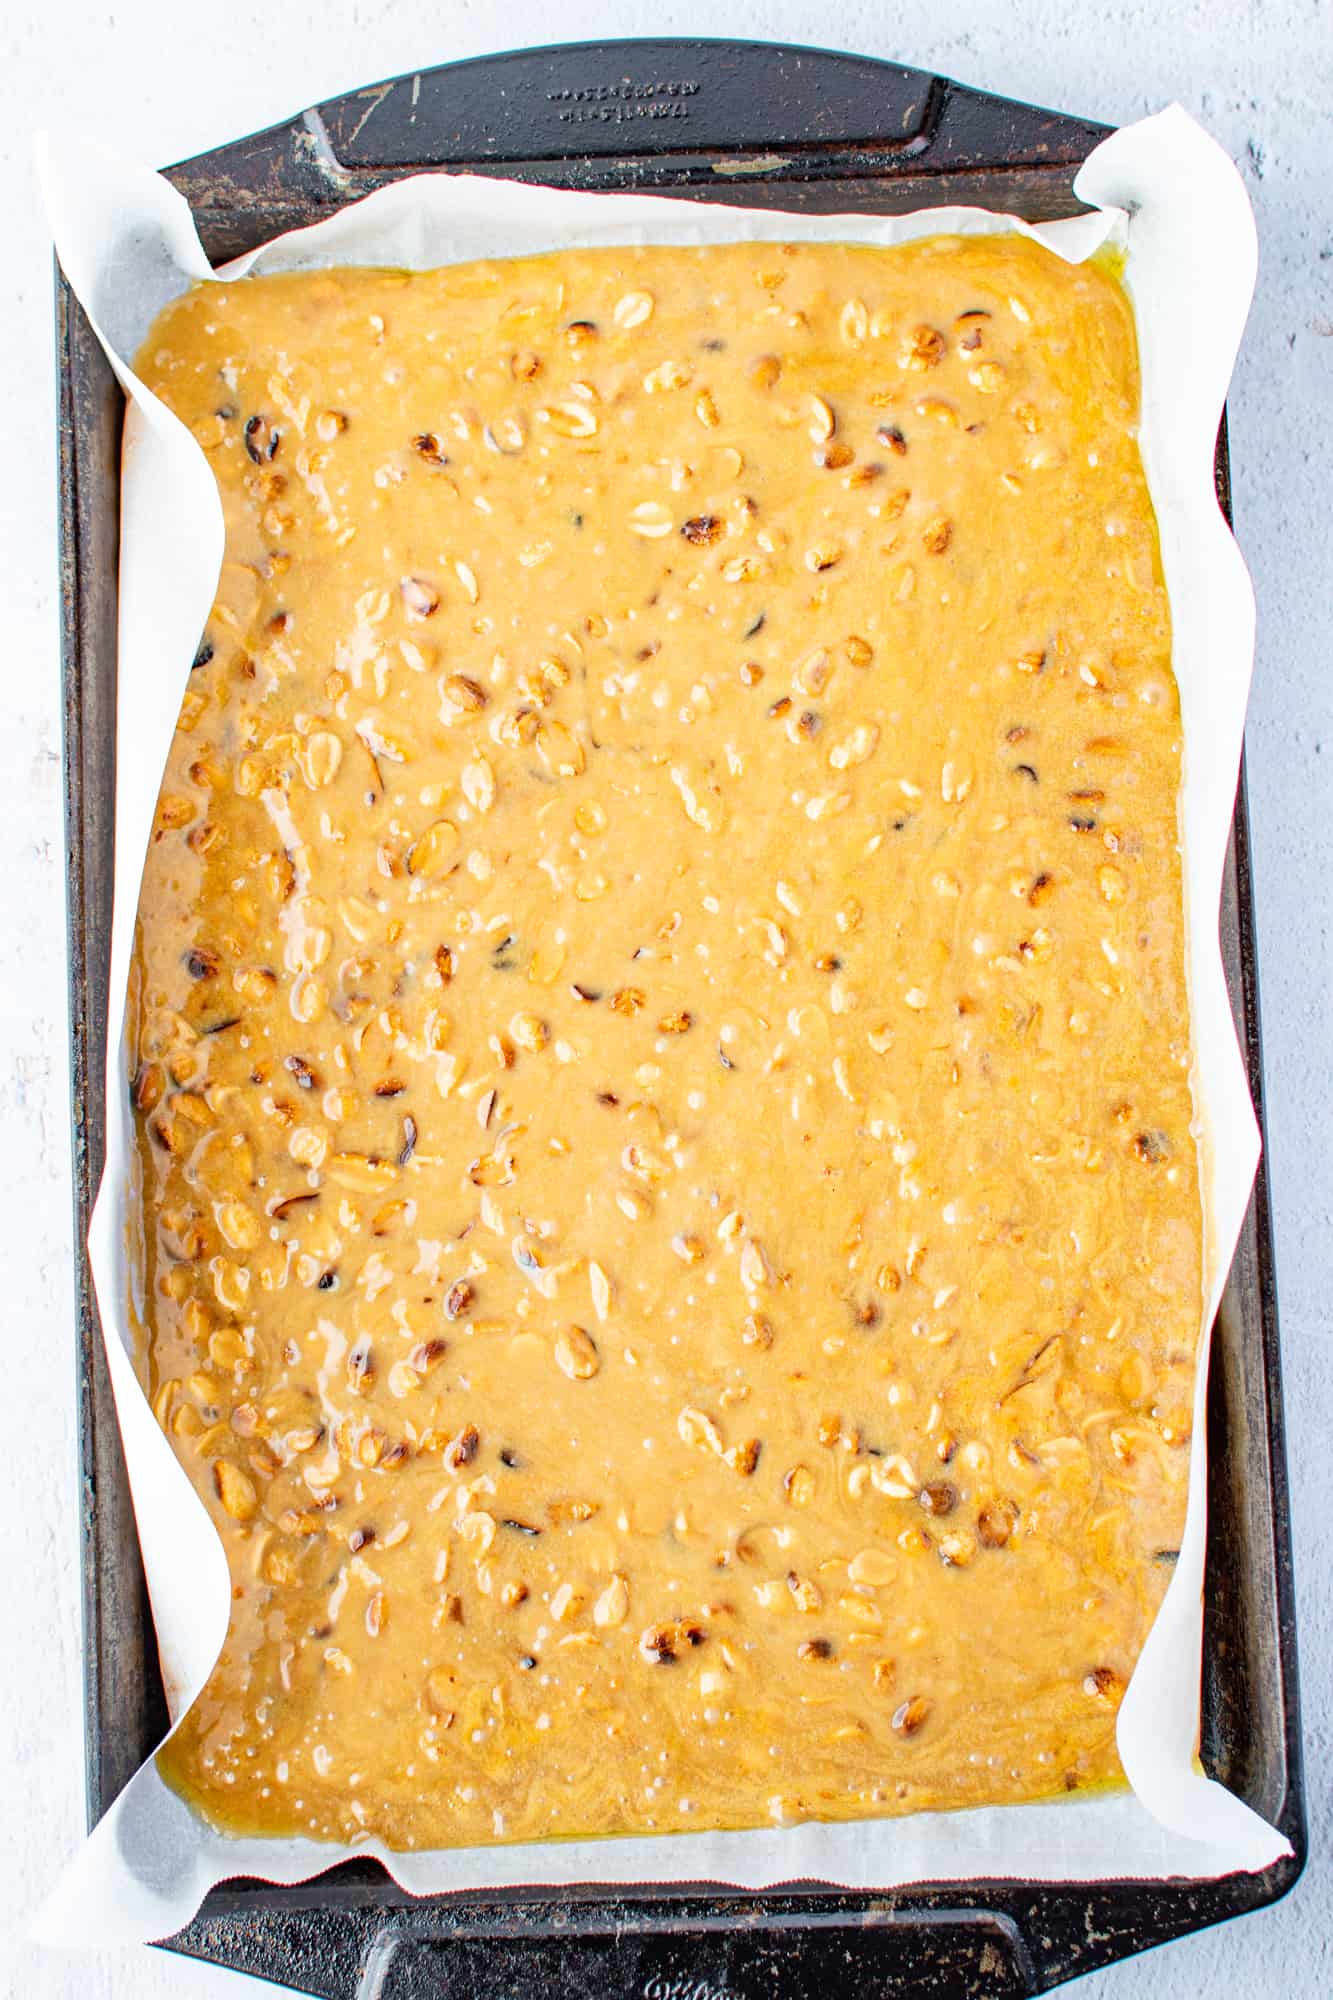 liquid peanut brittle shown after it has been poured onto a cookie sheet lined with parchment paper.